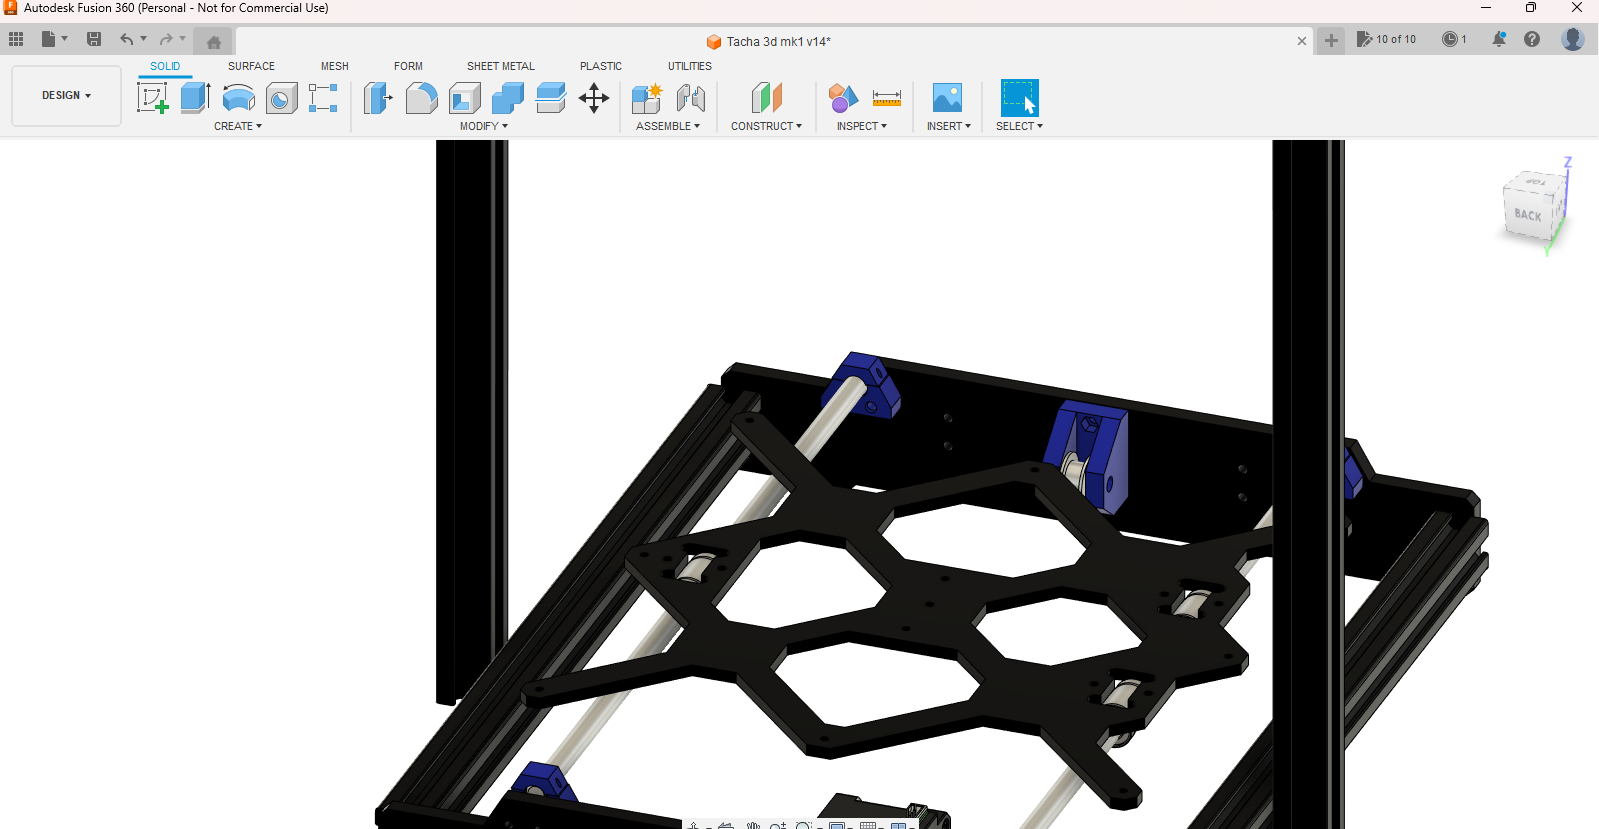 Autodesk Fusion 360 (Personal - Not for Commercial Use) 6_30_2023 9_27_45 PM.png